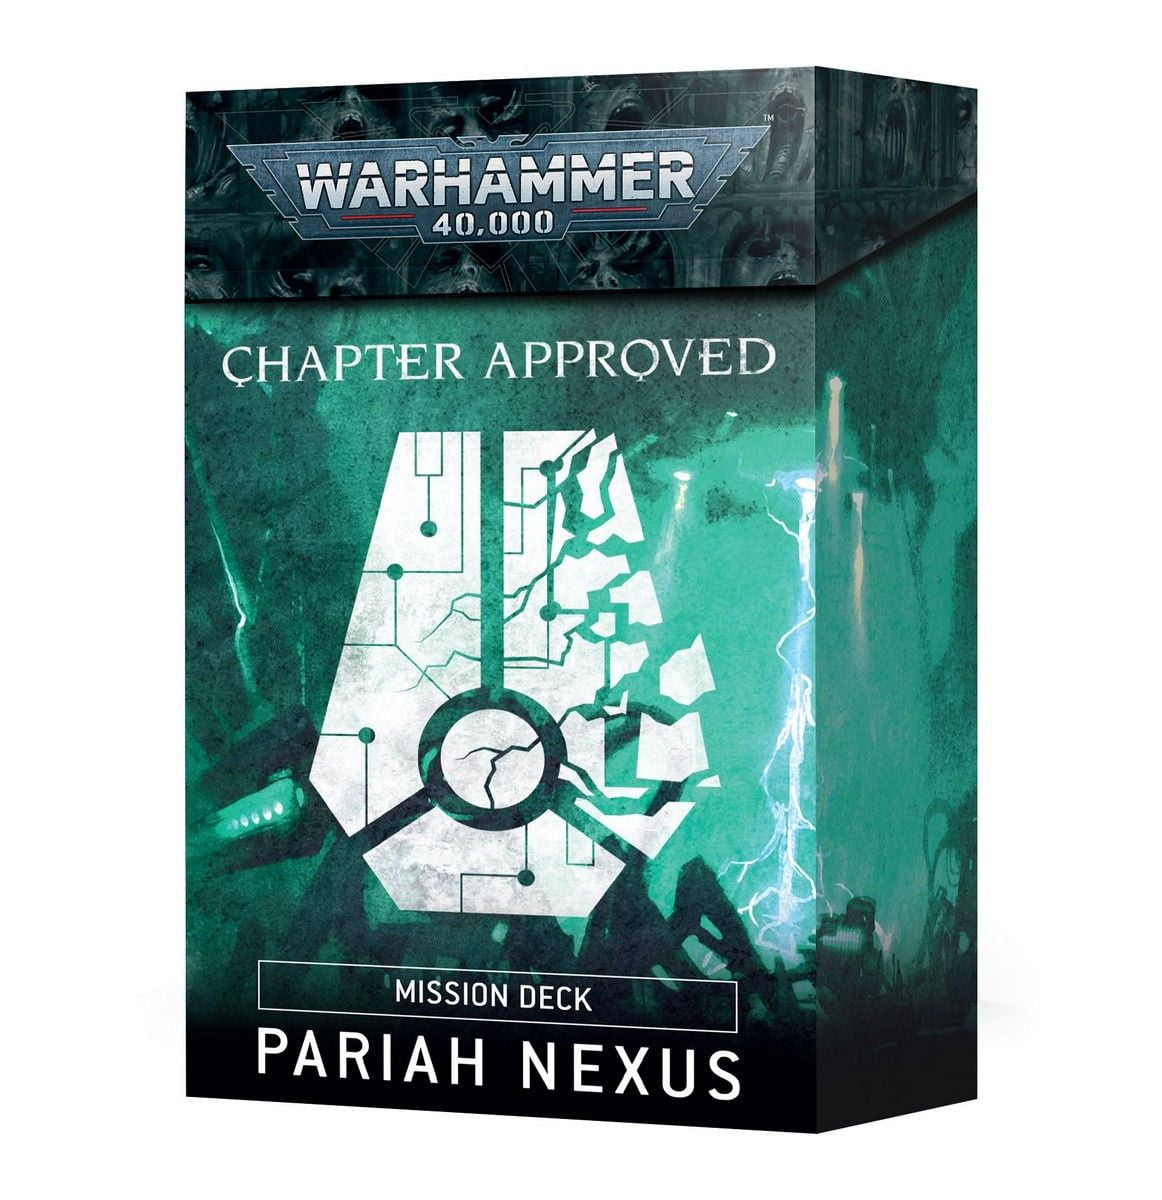 Warhammer 40,000: Chapter Approved: Pariah Nexus Mission Deck - English